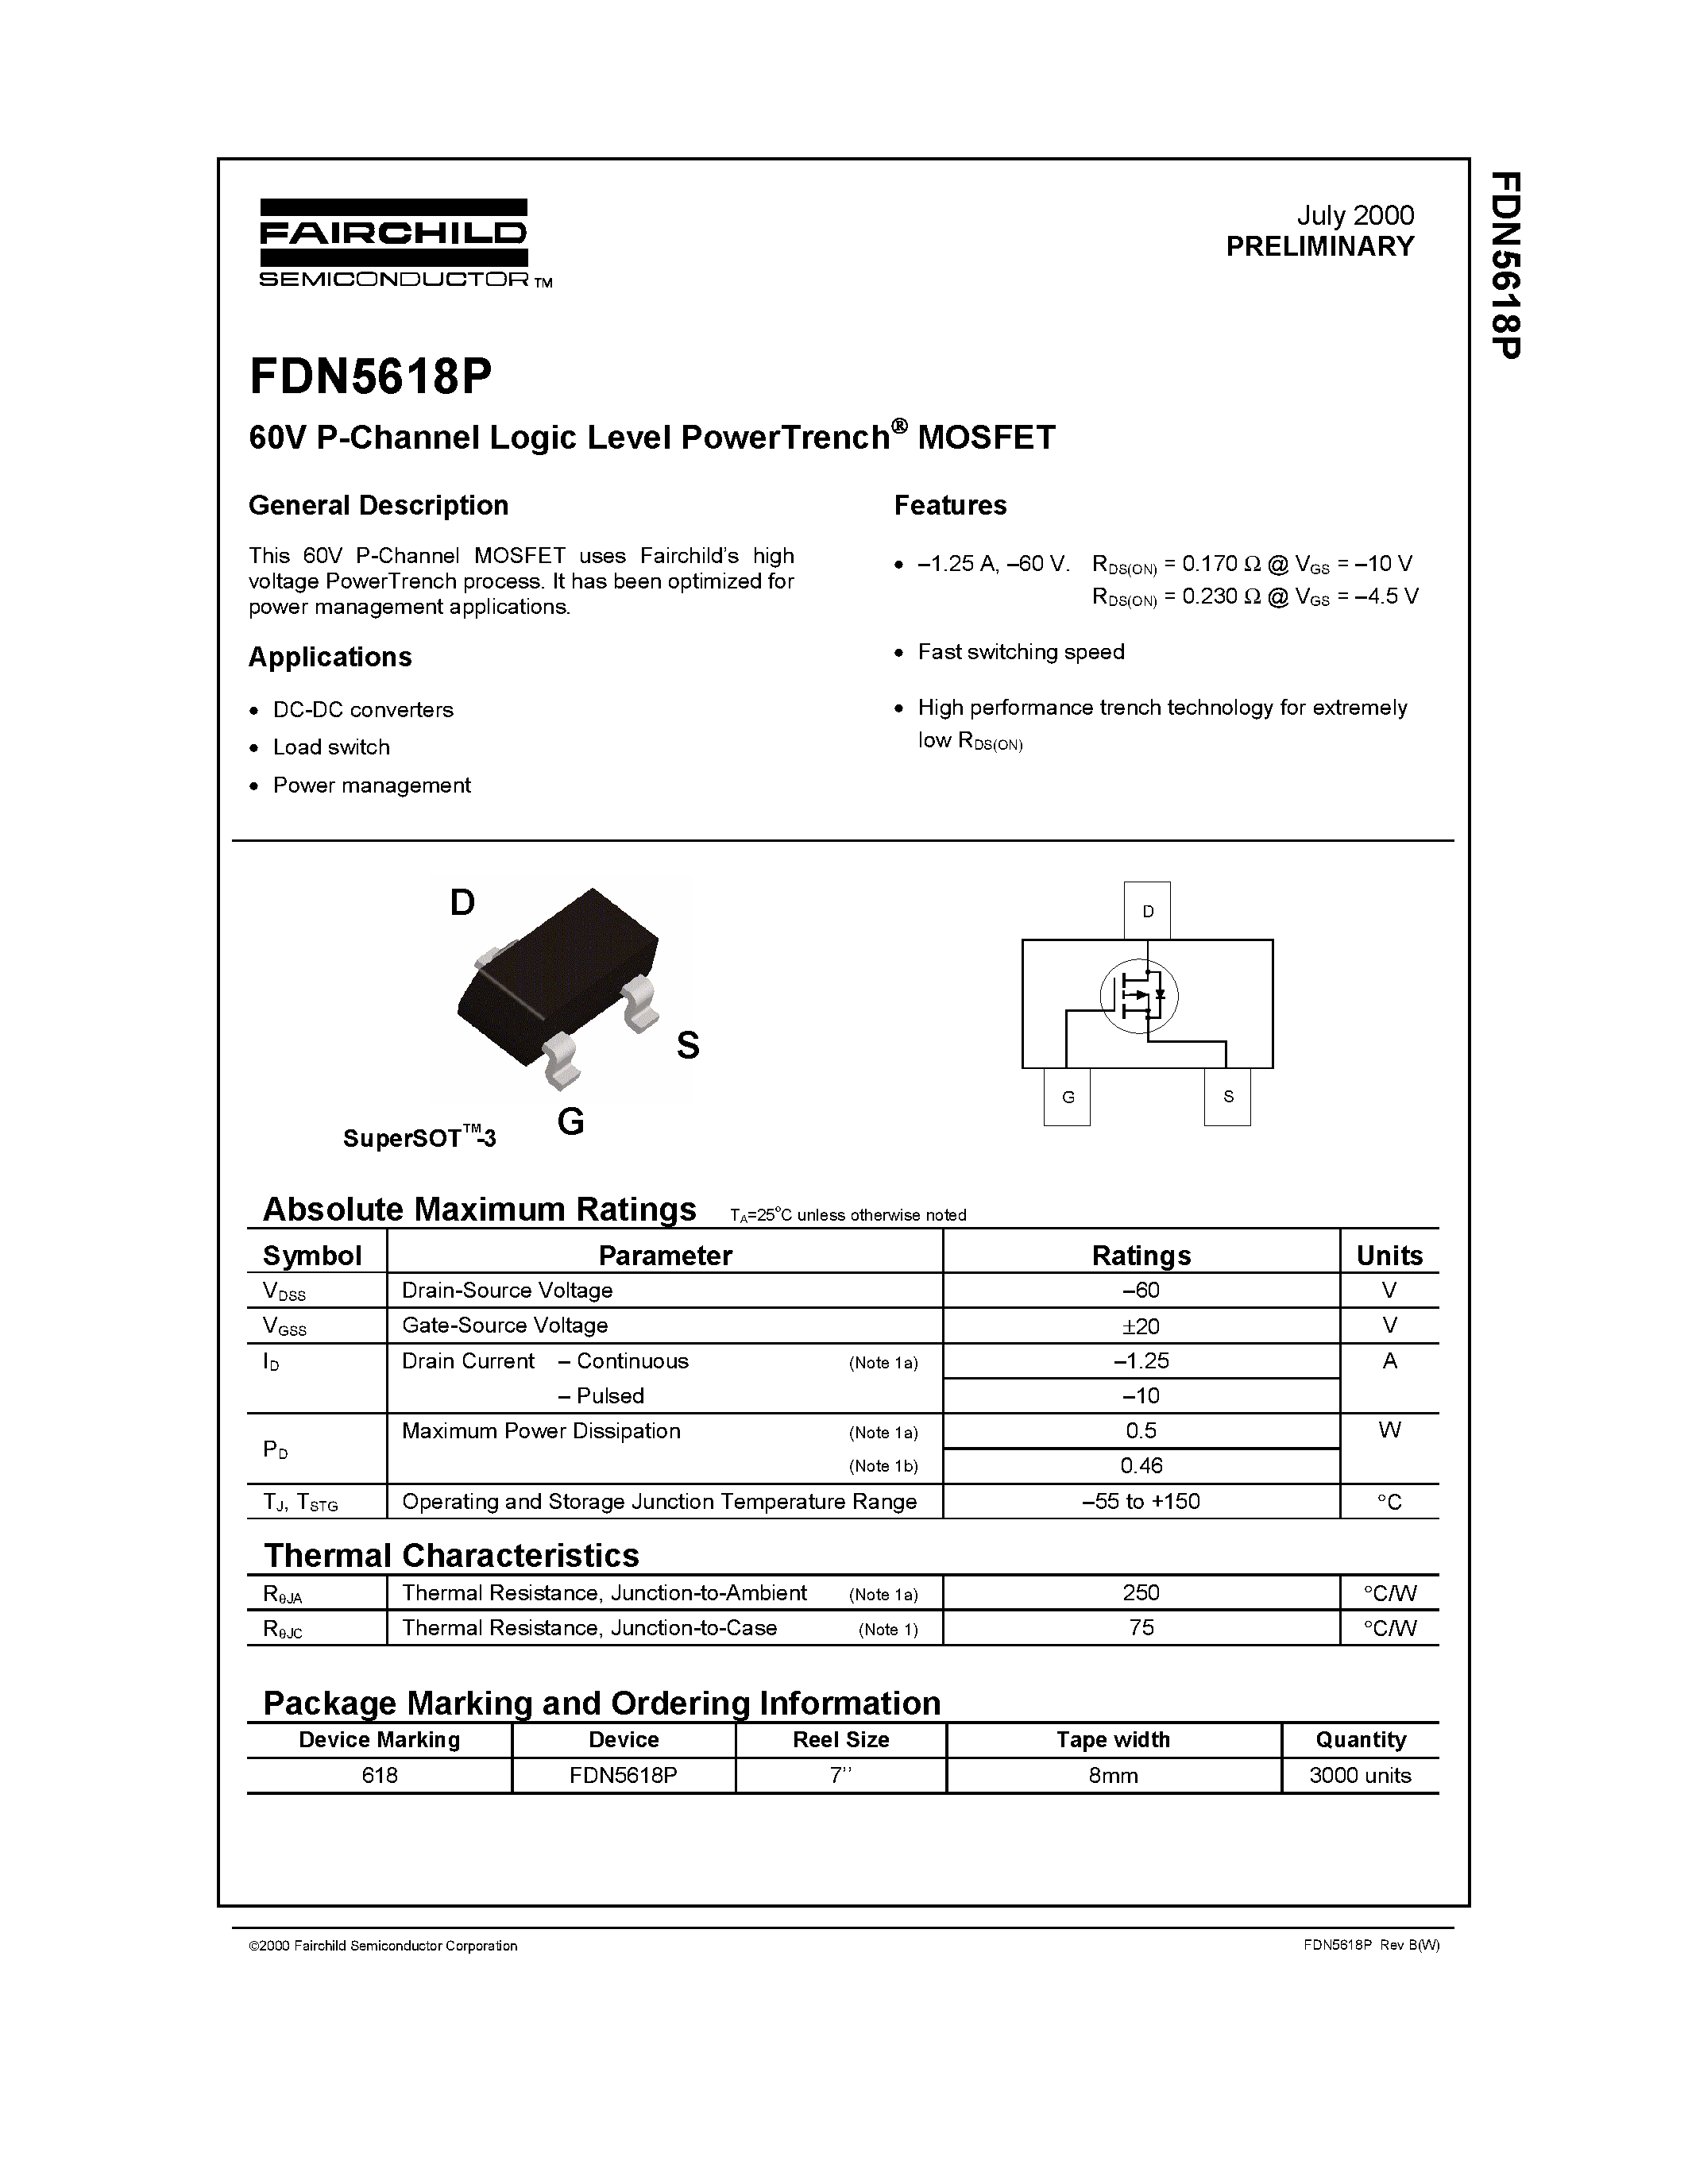 Даташит FDN5618 - 60V P-Channel Logic Level PowerTrench MOSFET страница 1